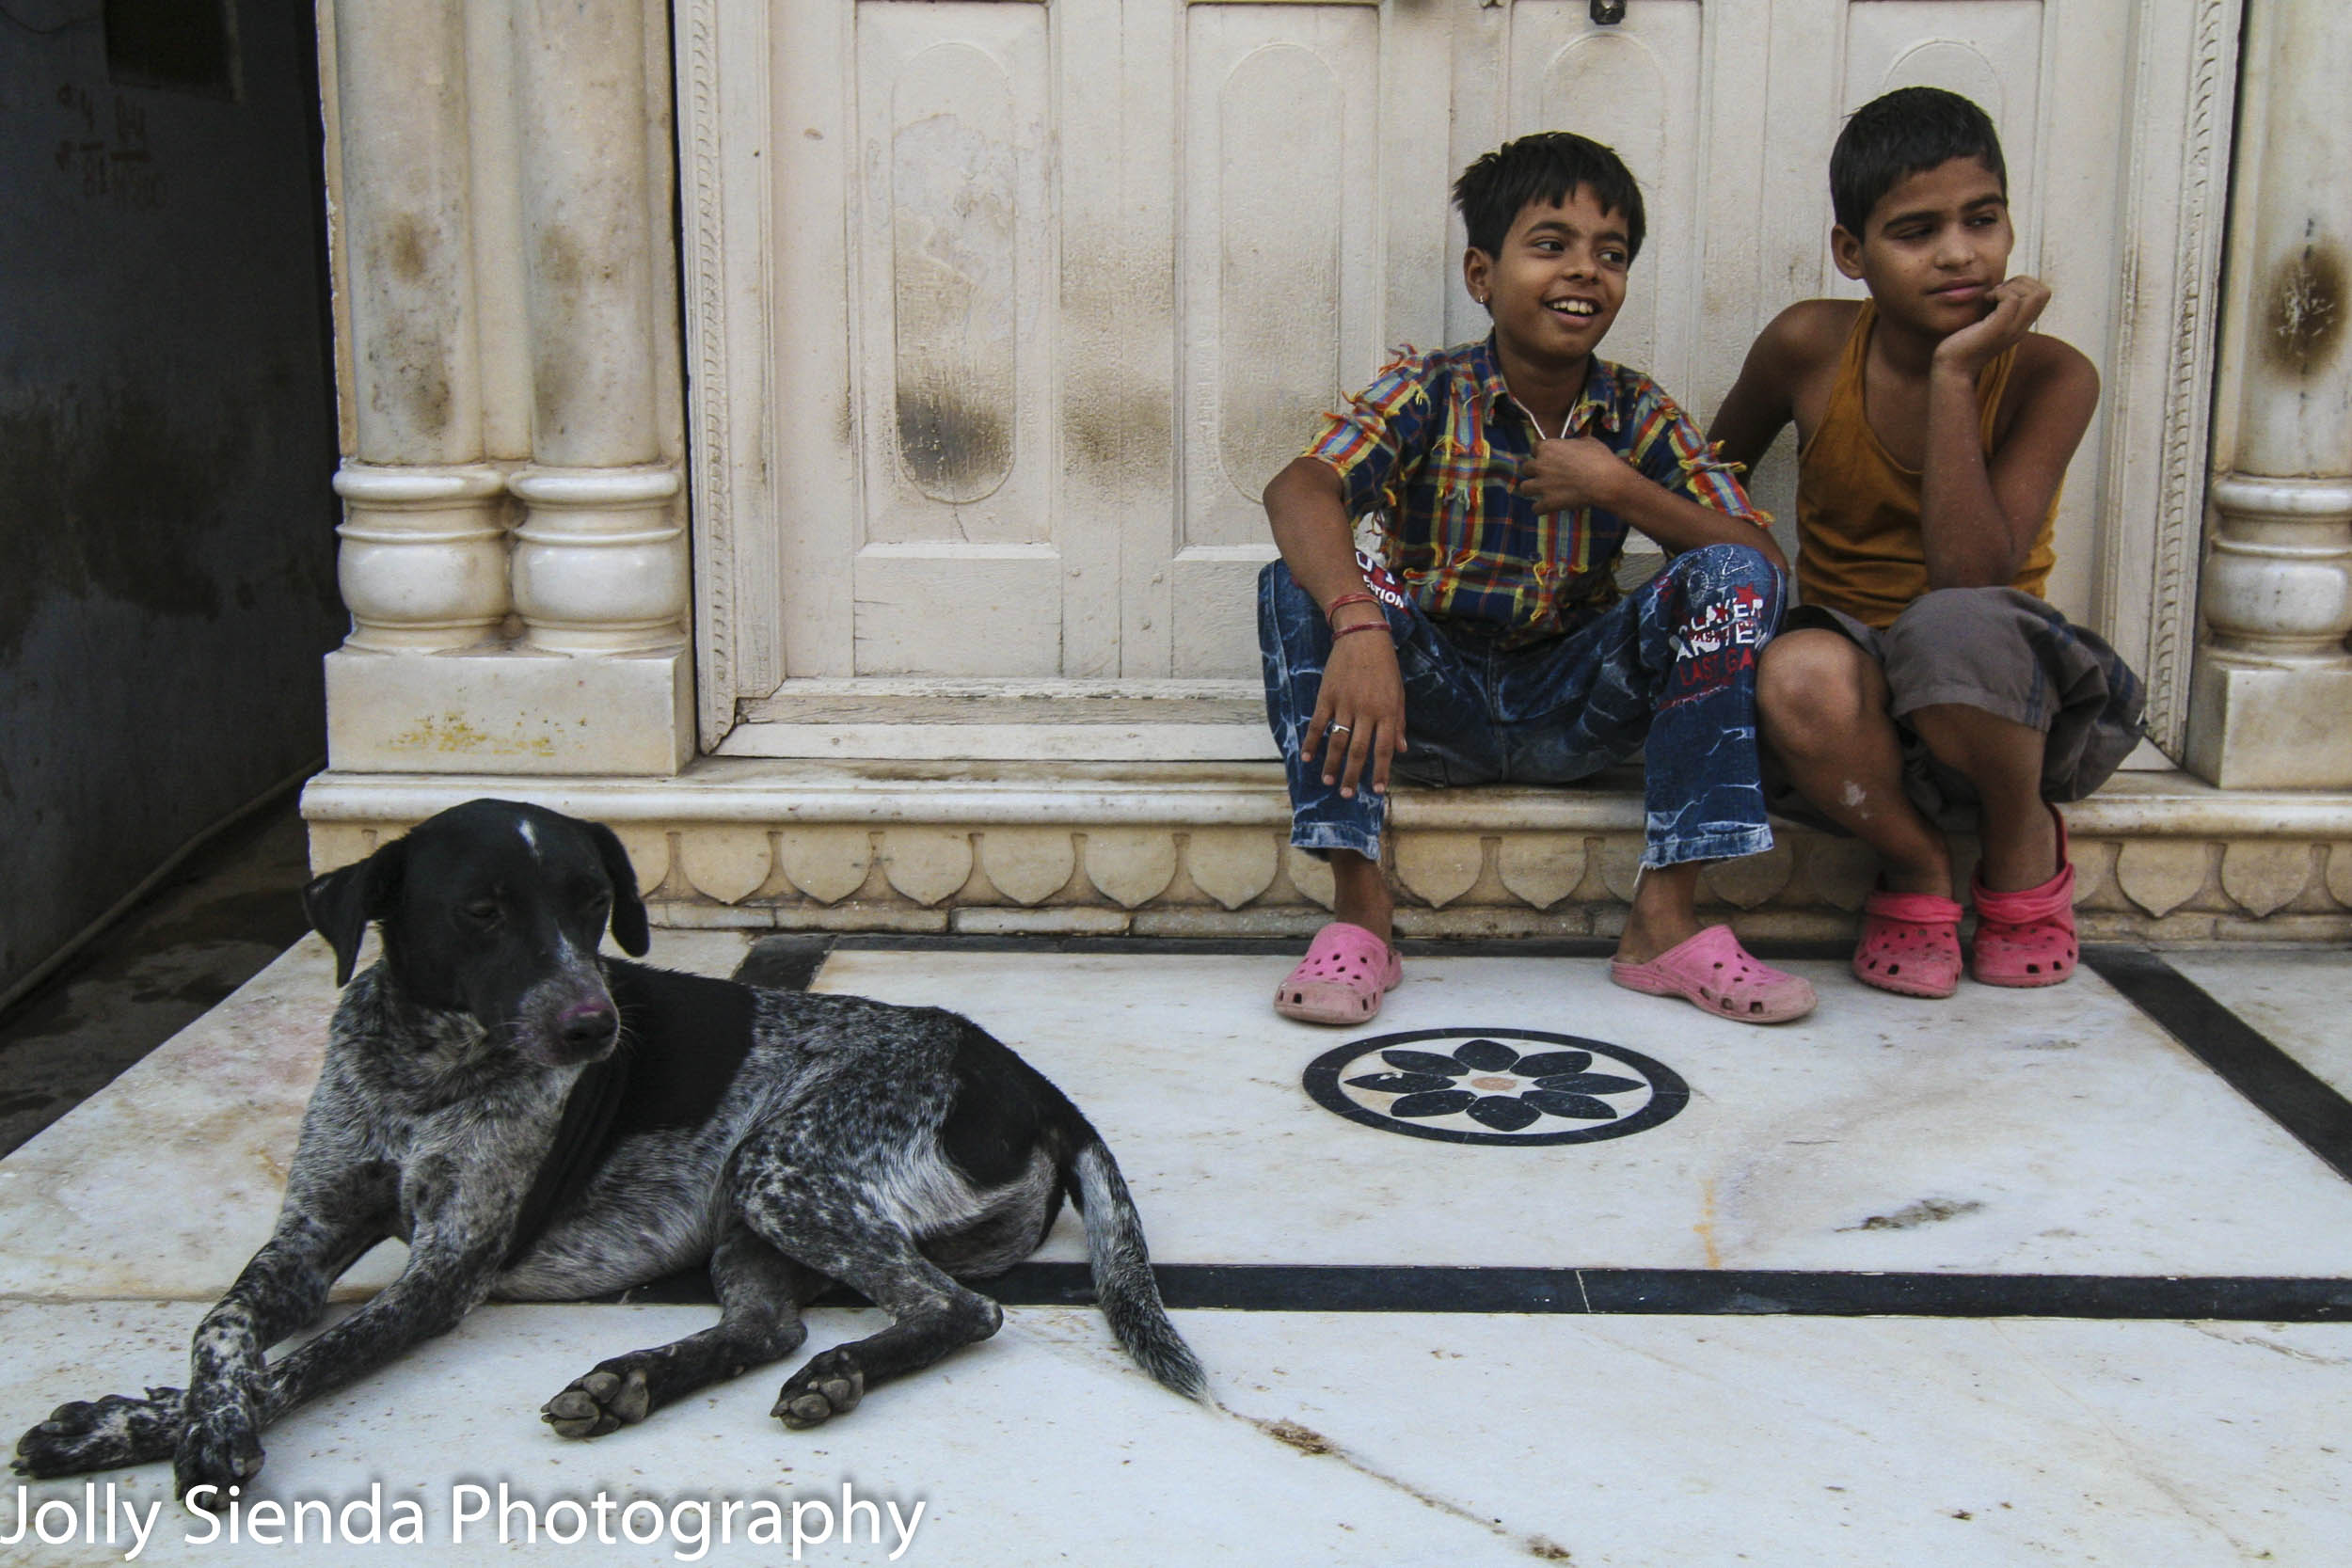 Boys laugh with their dog crossing his paws